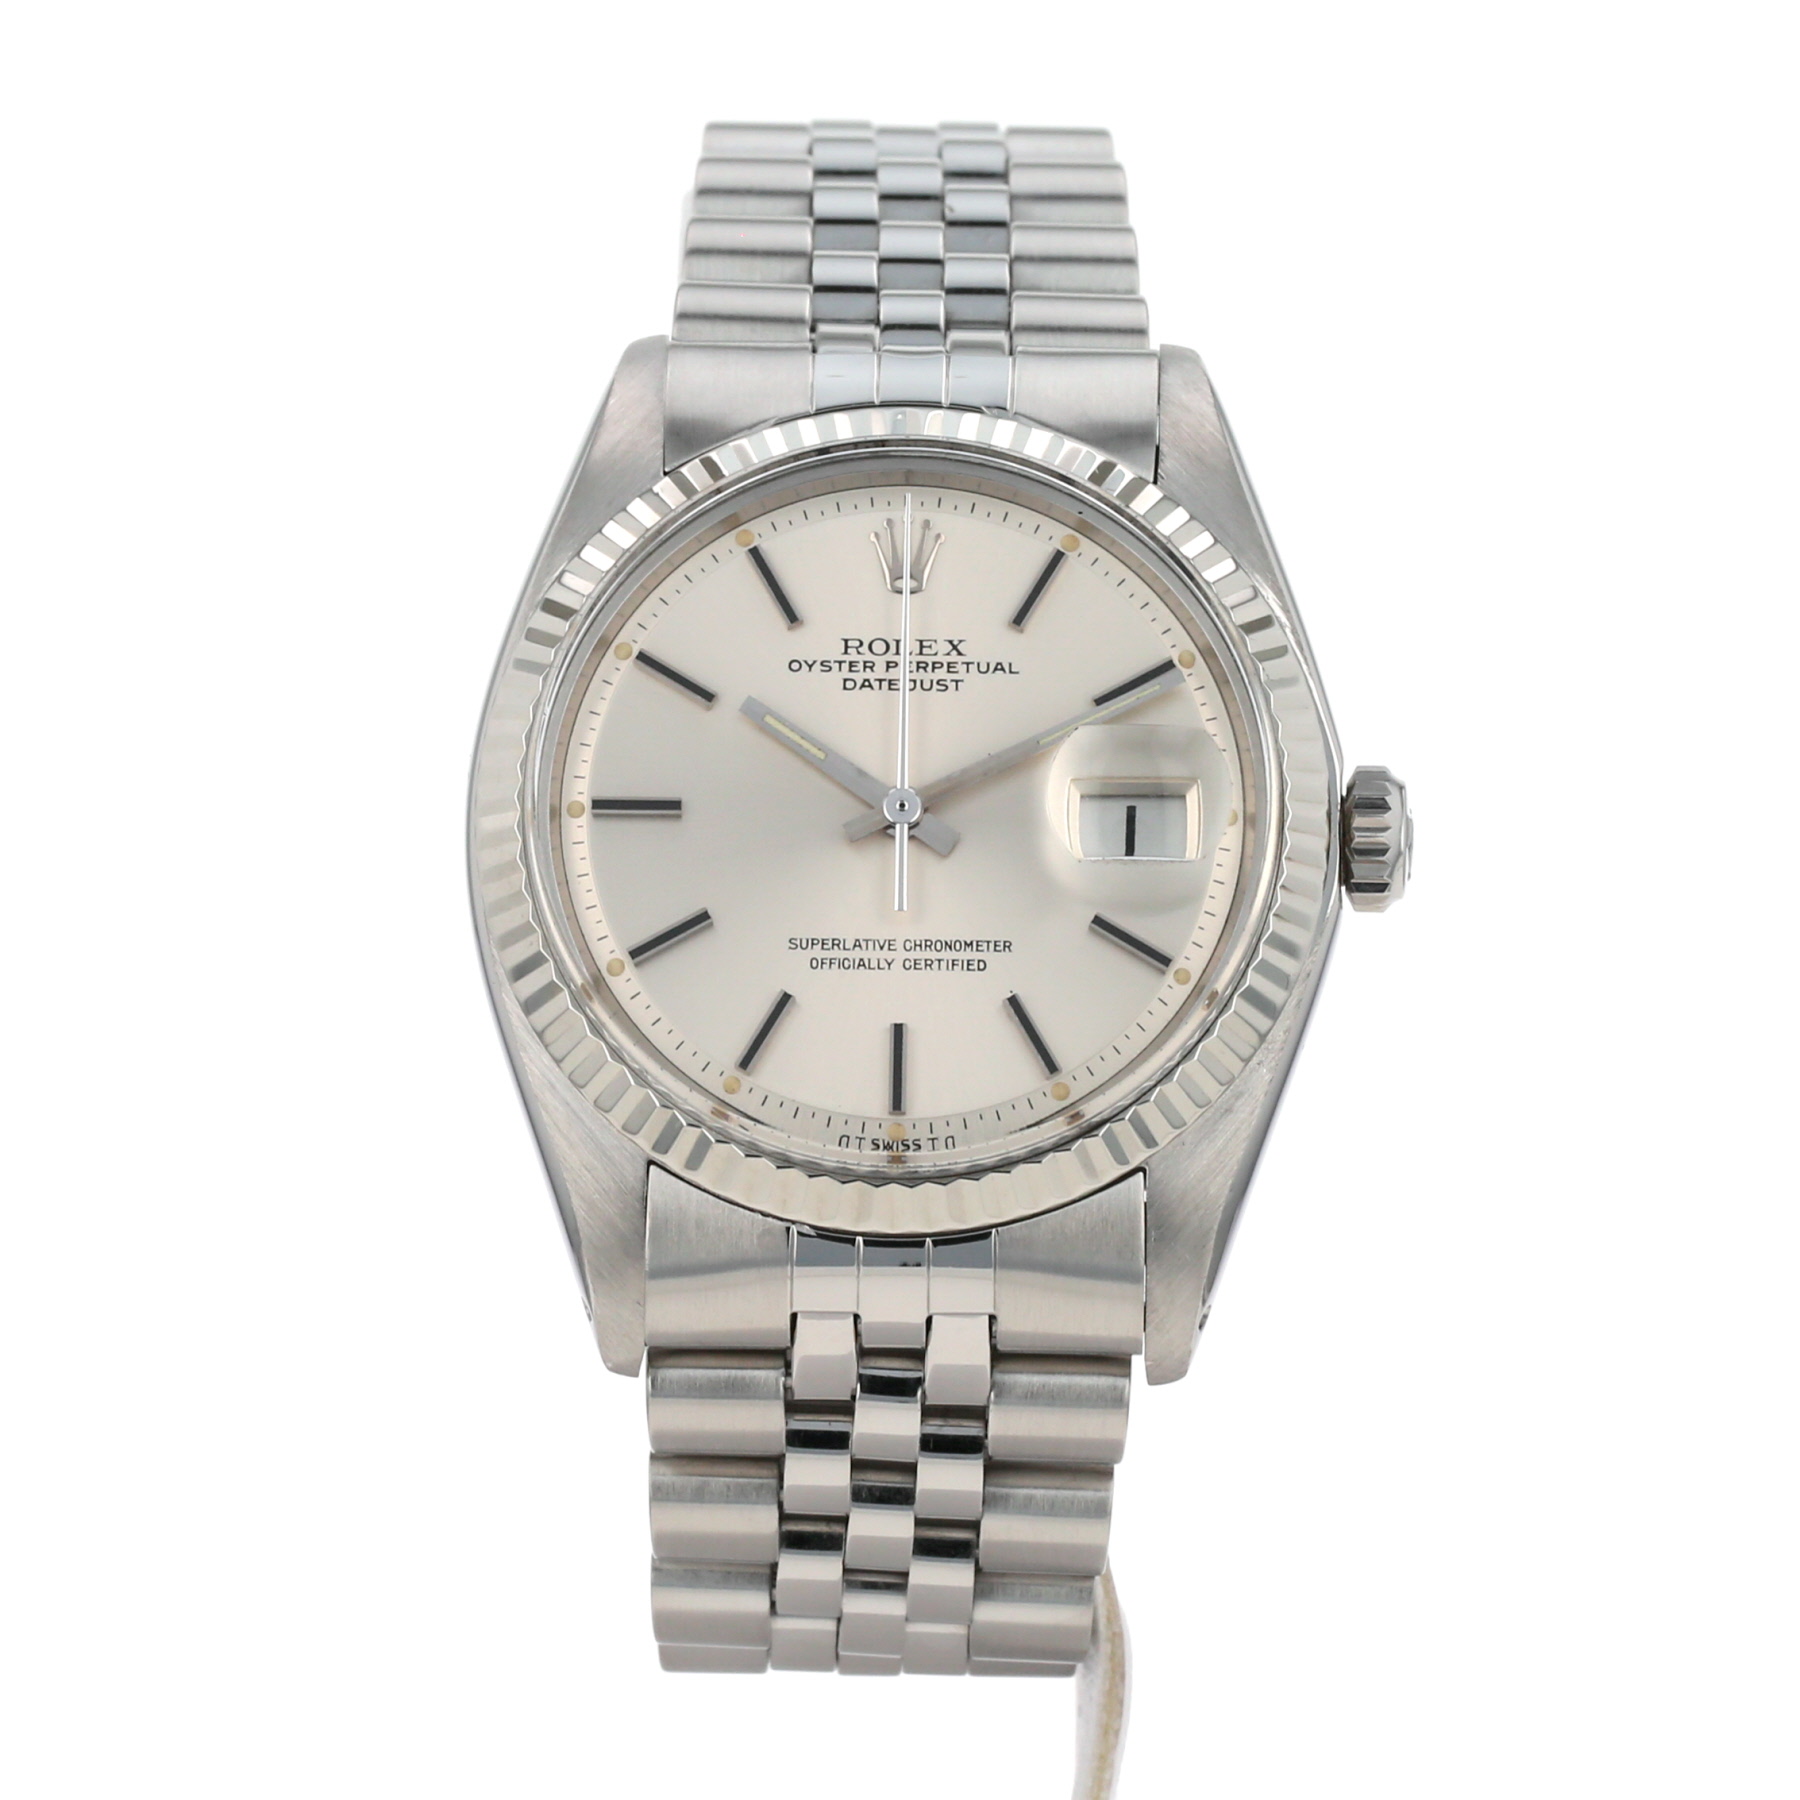 Datejust In And Stainless Steel Ref: 1601 Circa